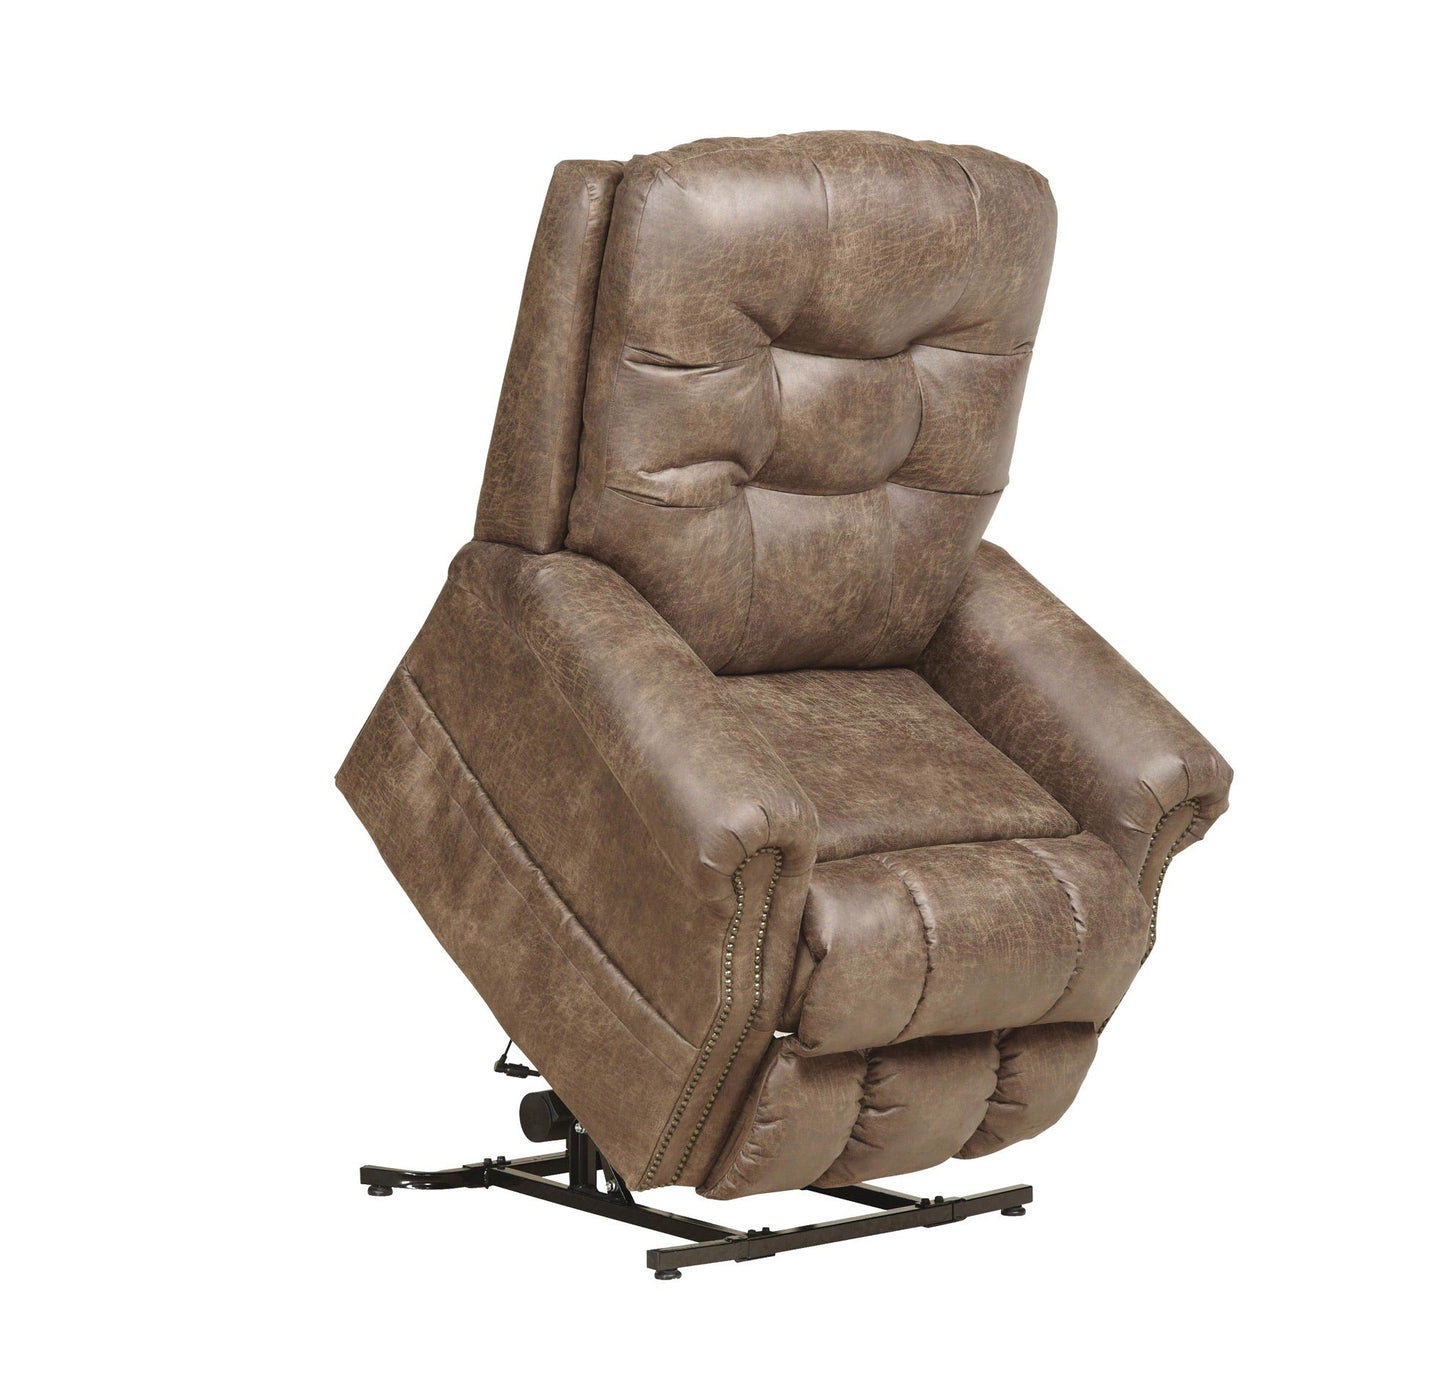 WEEKLY or MONTHLY. Ramsey Silt Lift Chair with Heat and Massage